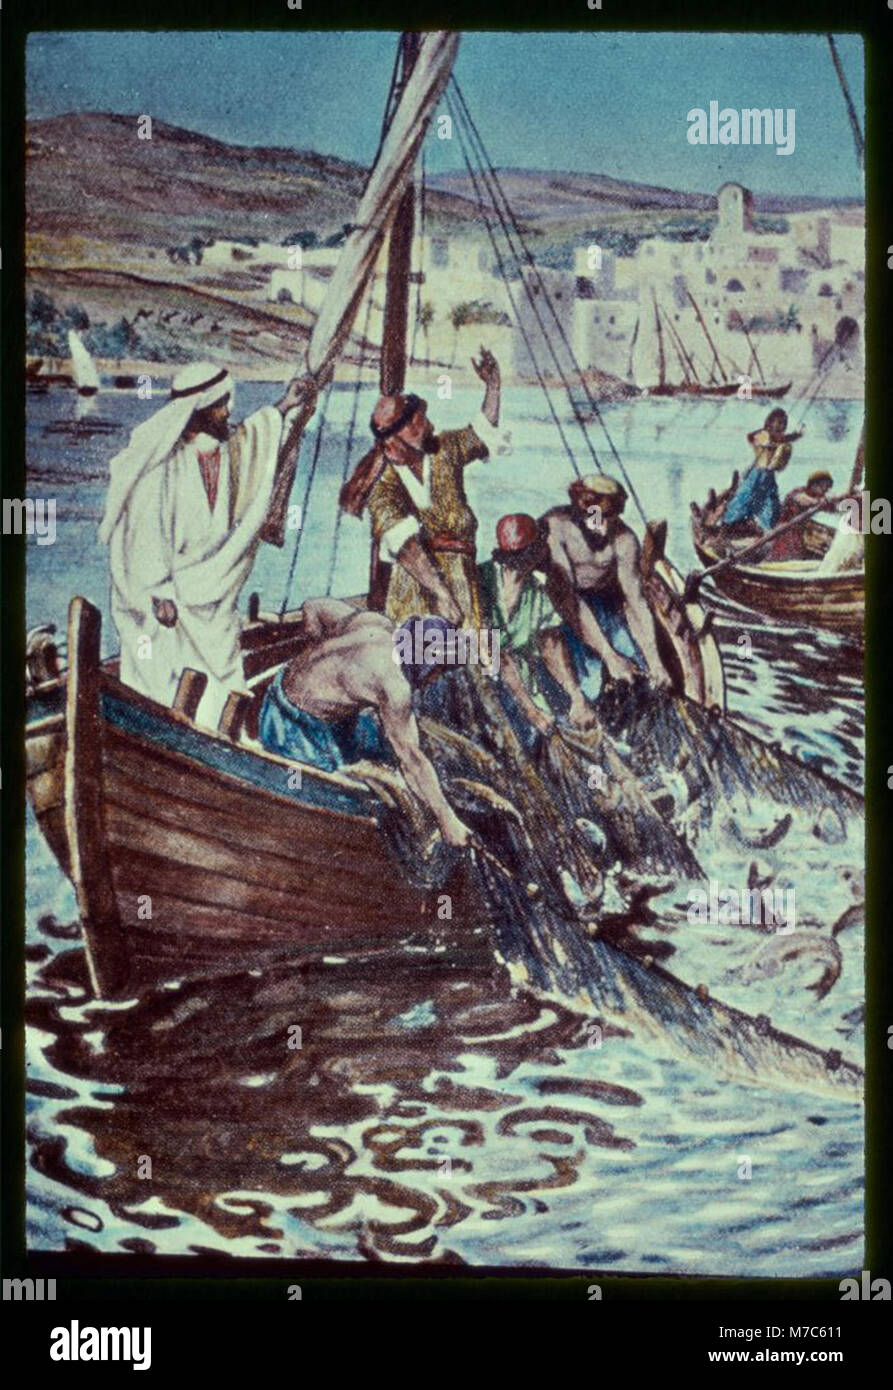 Luke 5-4-7. The preaching ended, Jesus commendeth Simon Peter to let down his net in deep water, which being done, a great multitude of fishes is enclosed LOC matpc.23130 Stock Photo